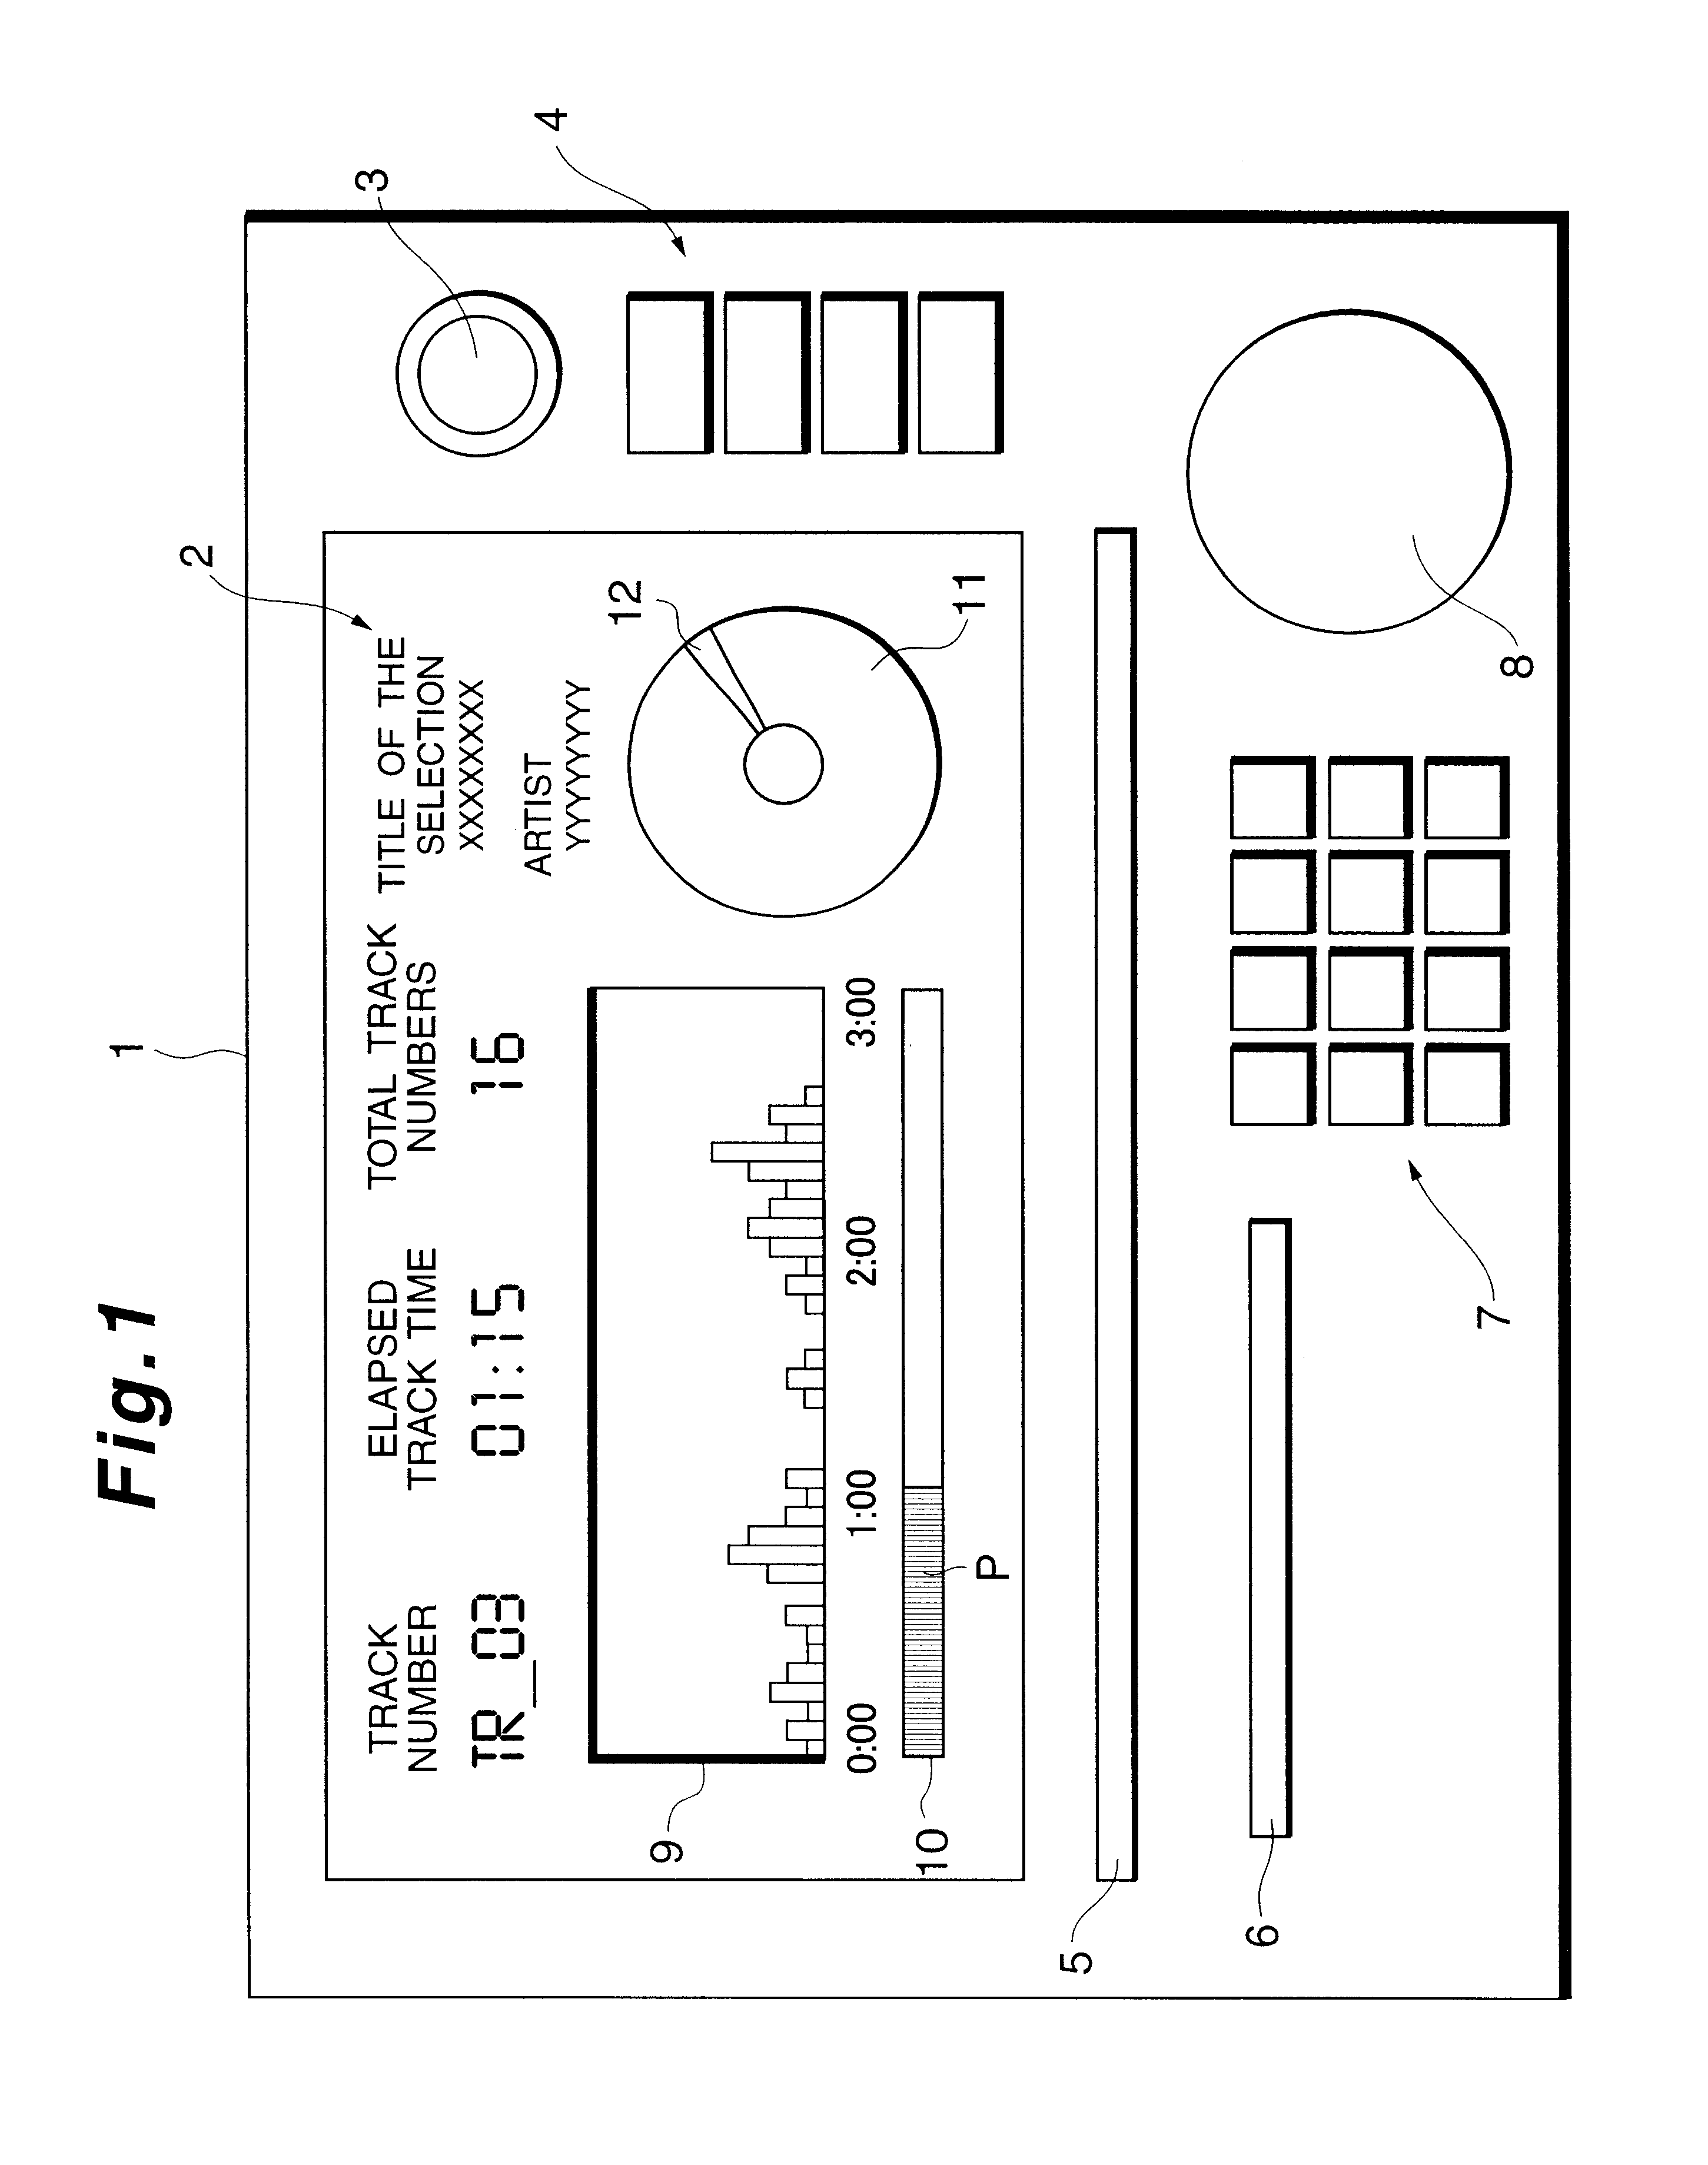 Playback apparatus for displaying angular position based on remainder corresponding to elapsed time